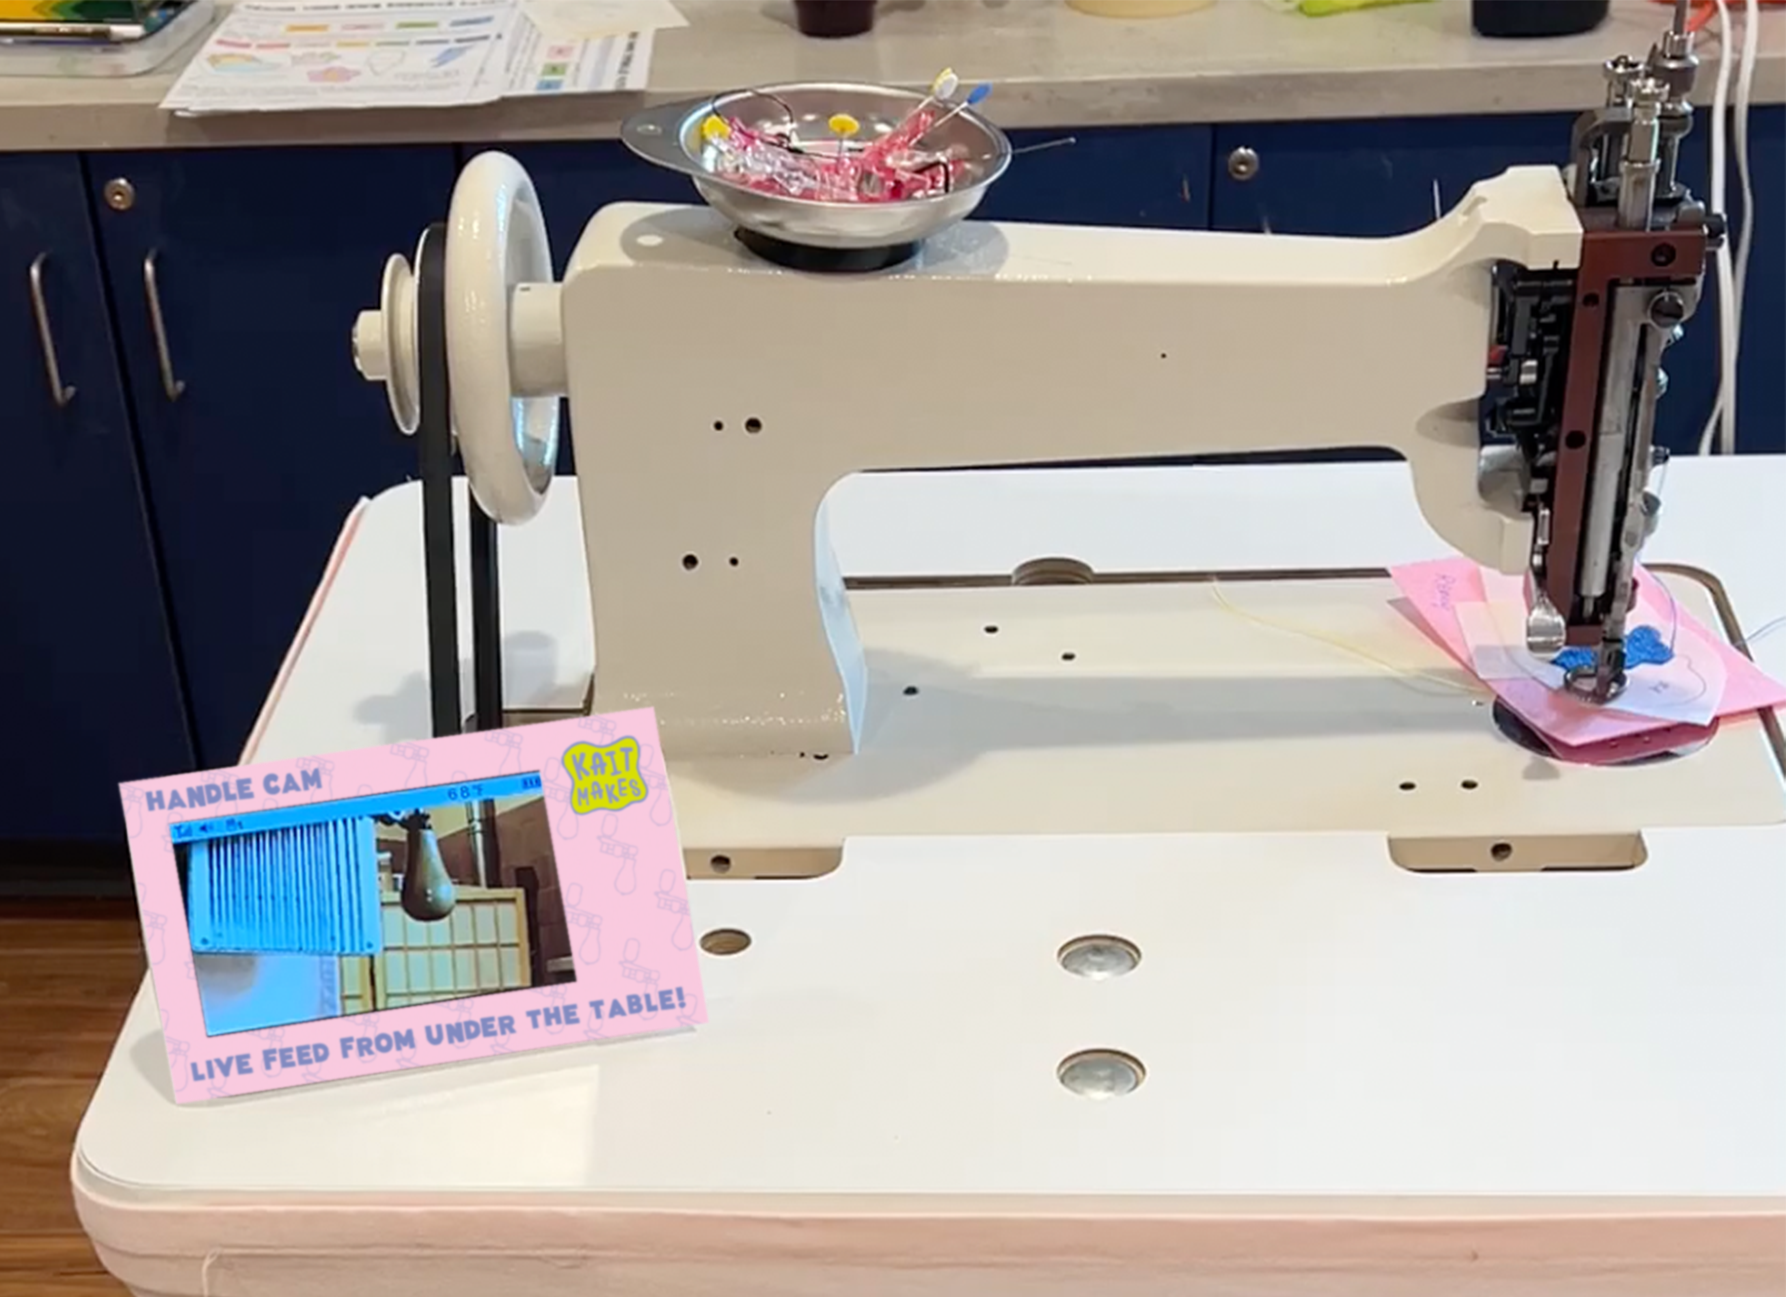 view of Kaitlyn's chainstitch embroidery machine with a small baby monitor screen next to it showing the handle under the table